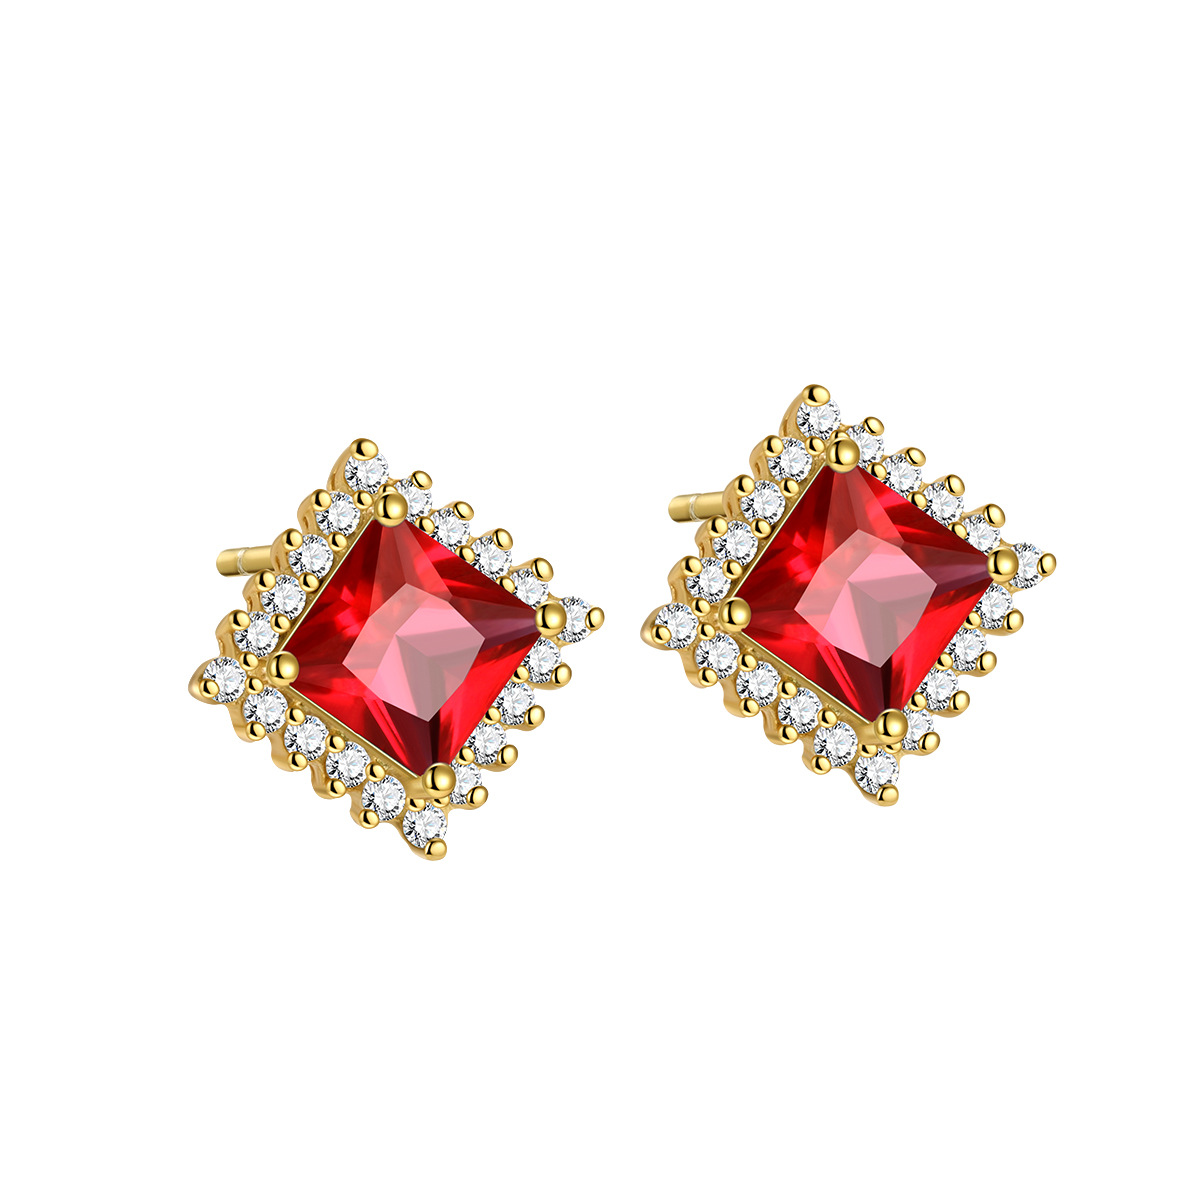 10:Yellow gold red stone